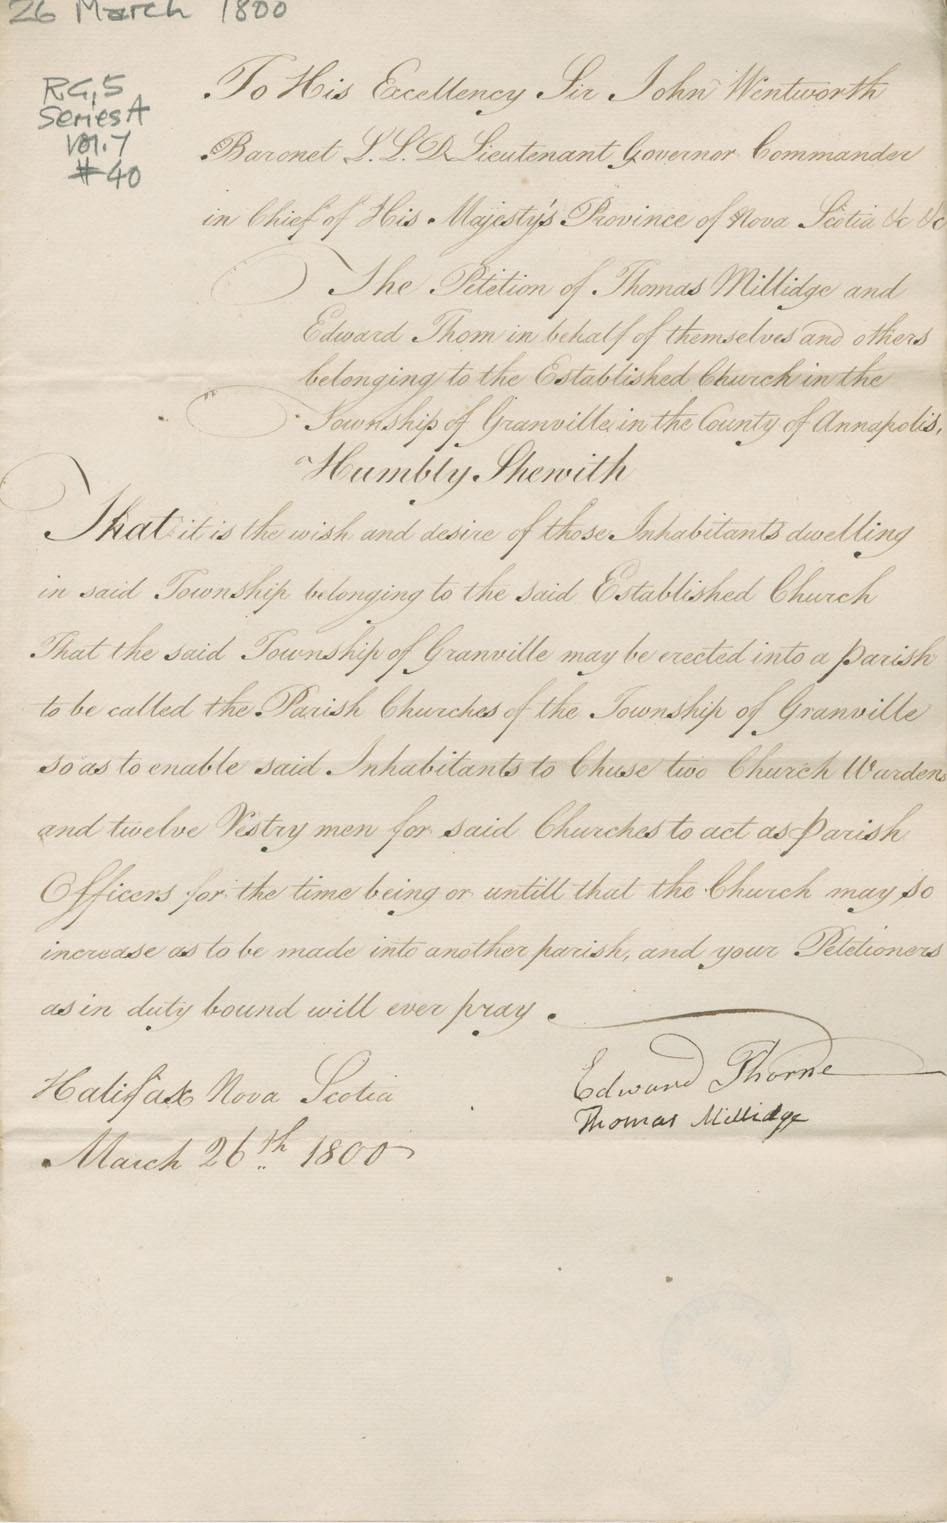 assembly : Petition of Thomas Millidge and Edward Thorne for the establishment of Granville Township as a parish